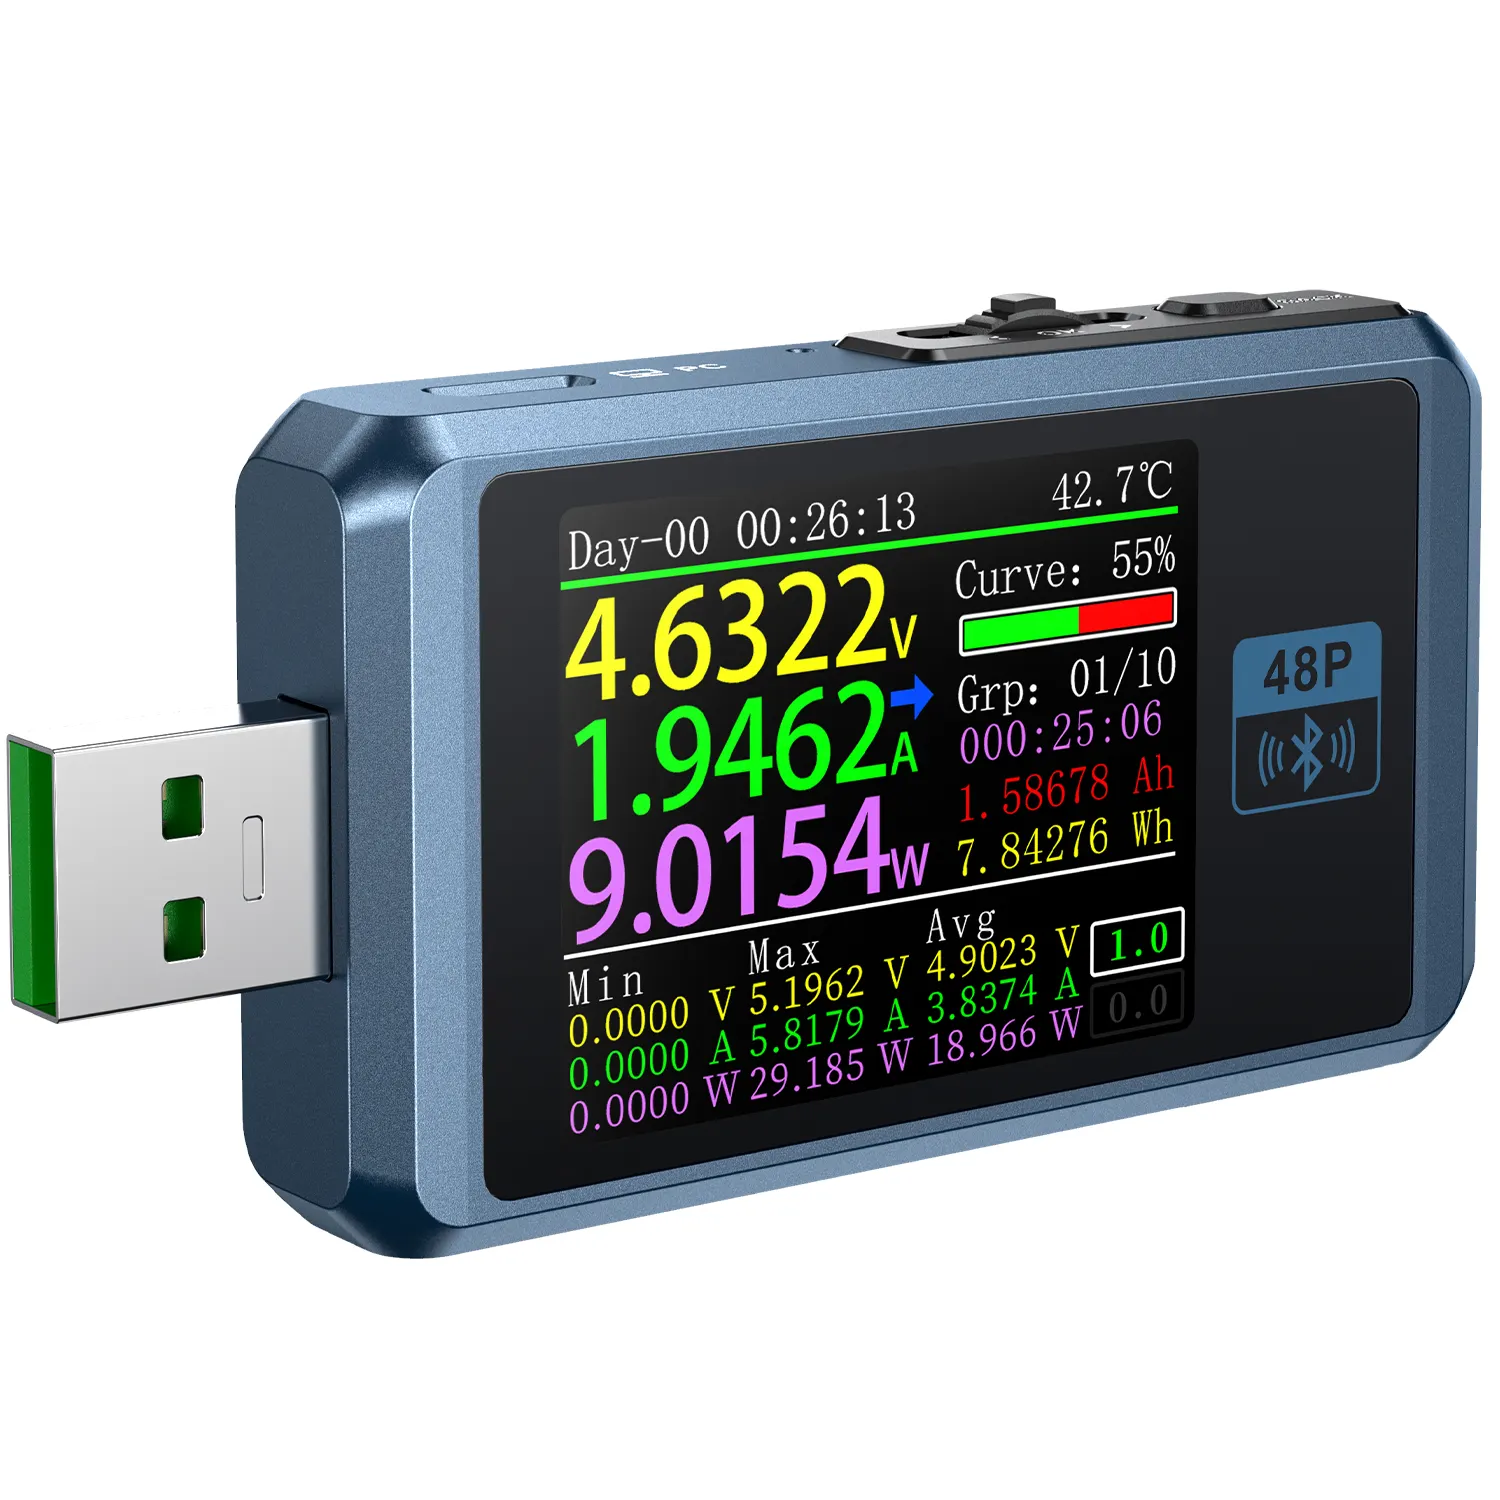 FNIRSI FNB48P Usb Tester Detection Trigger Capacity Ripple Measurement With Cnc Metal Shell Voltmeter Ammeter Type-c Fast Charge